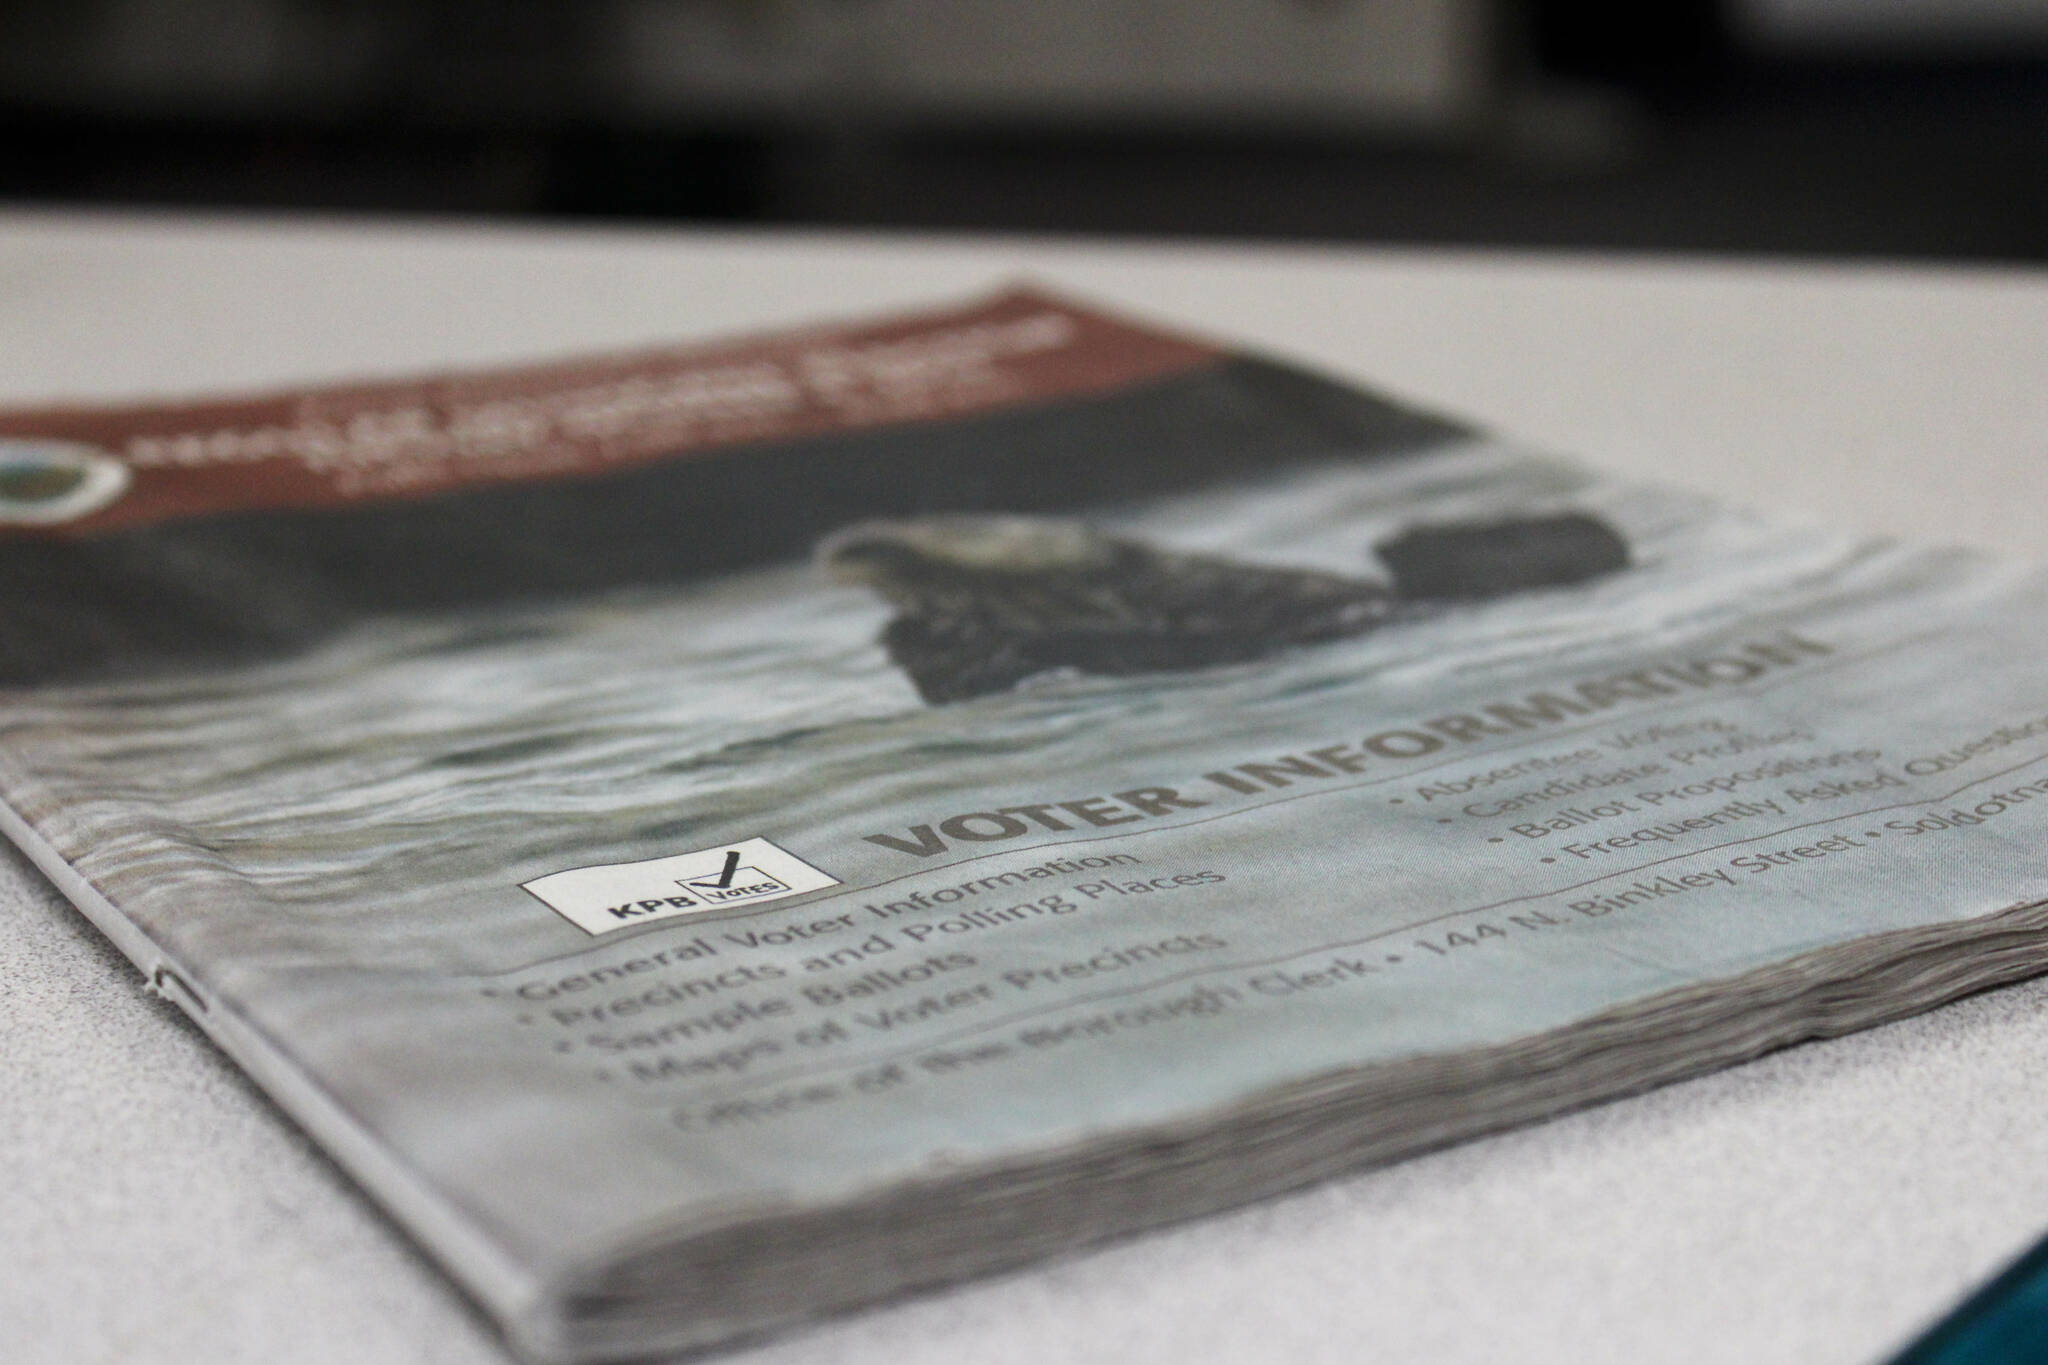 A 2022 voter information pamphlet rests on a desk in the Peninsula Clarion offices on Wednesday, Jan. 18, 2023, in Kenai, Alaska. (Ashlyn O’Hara/Peninsula Clarion)